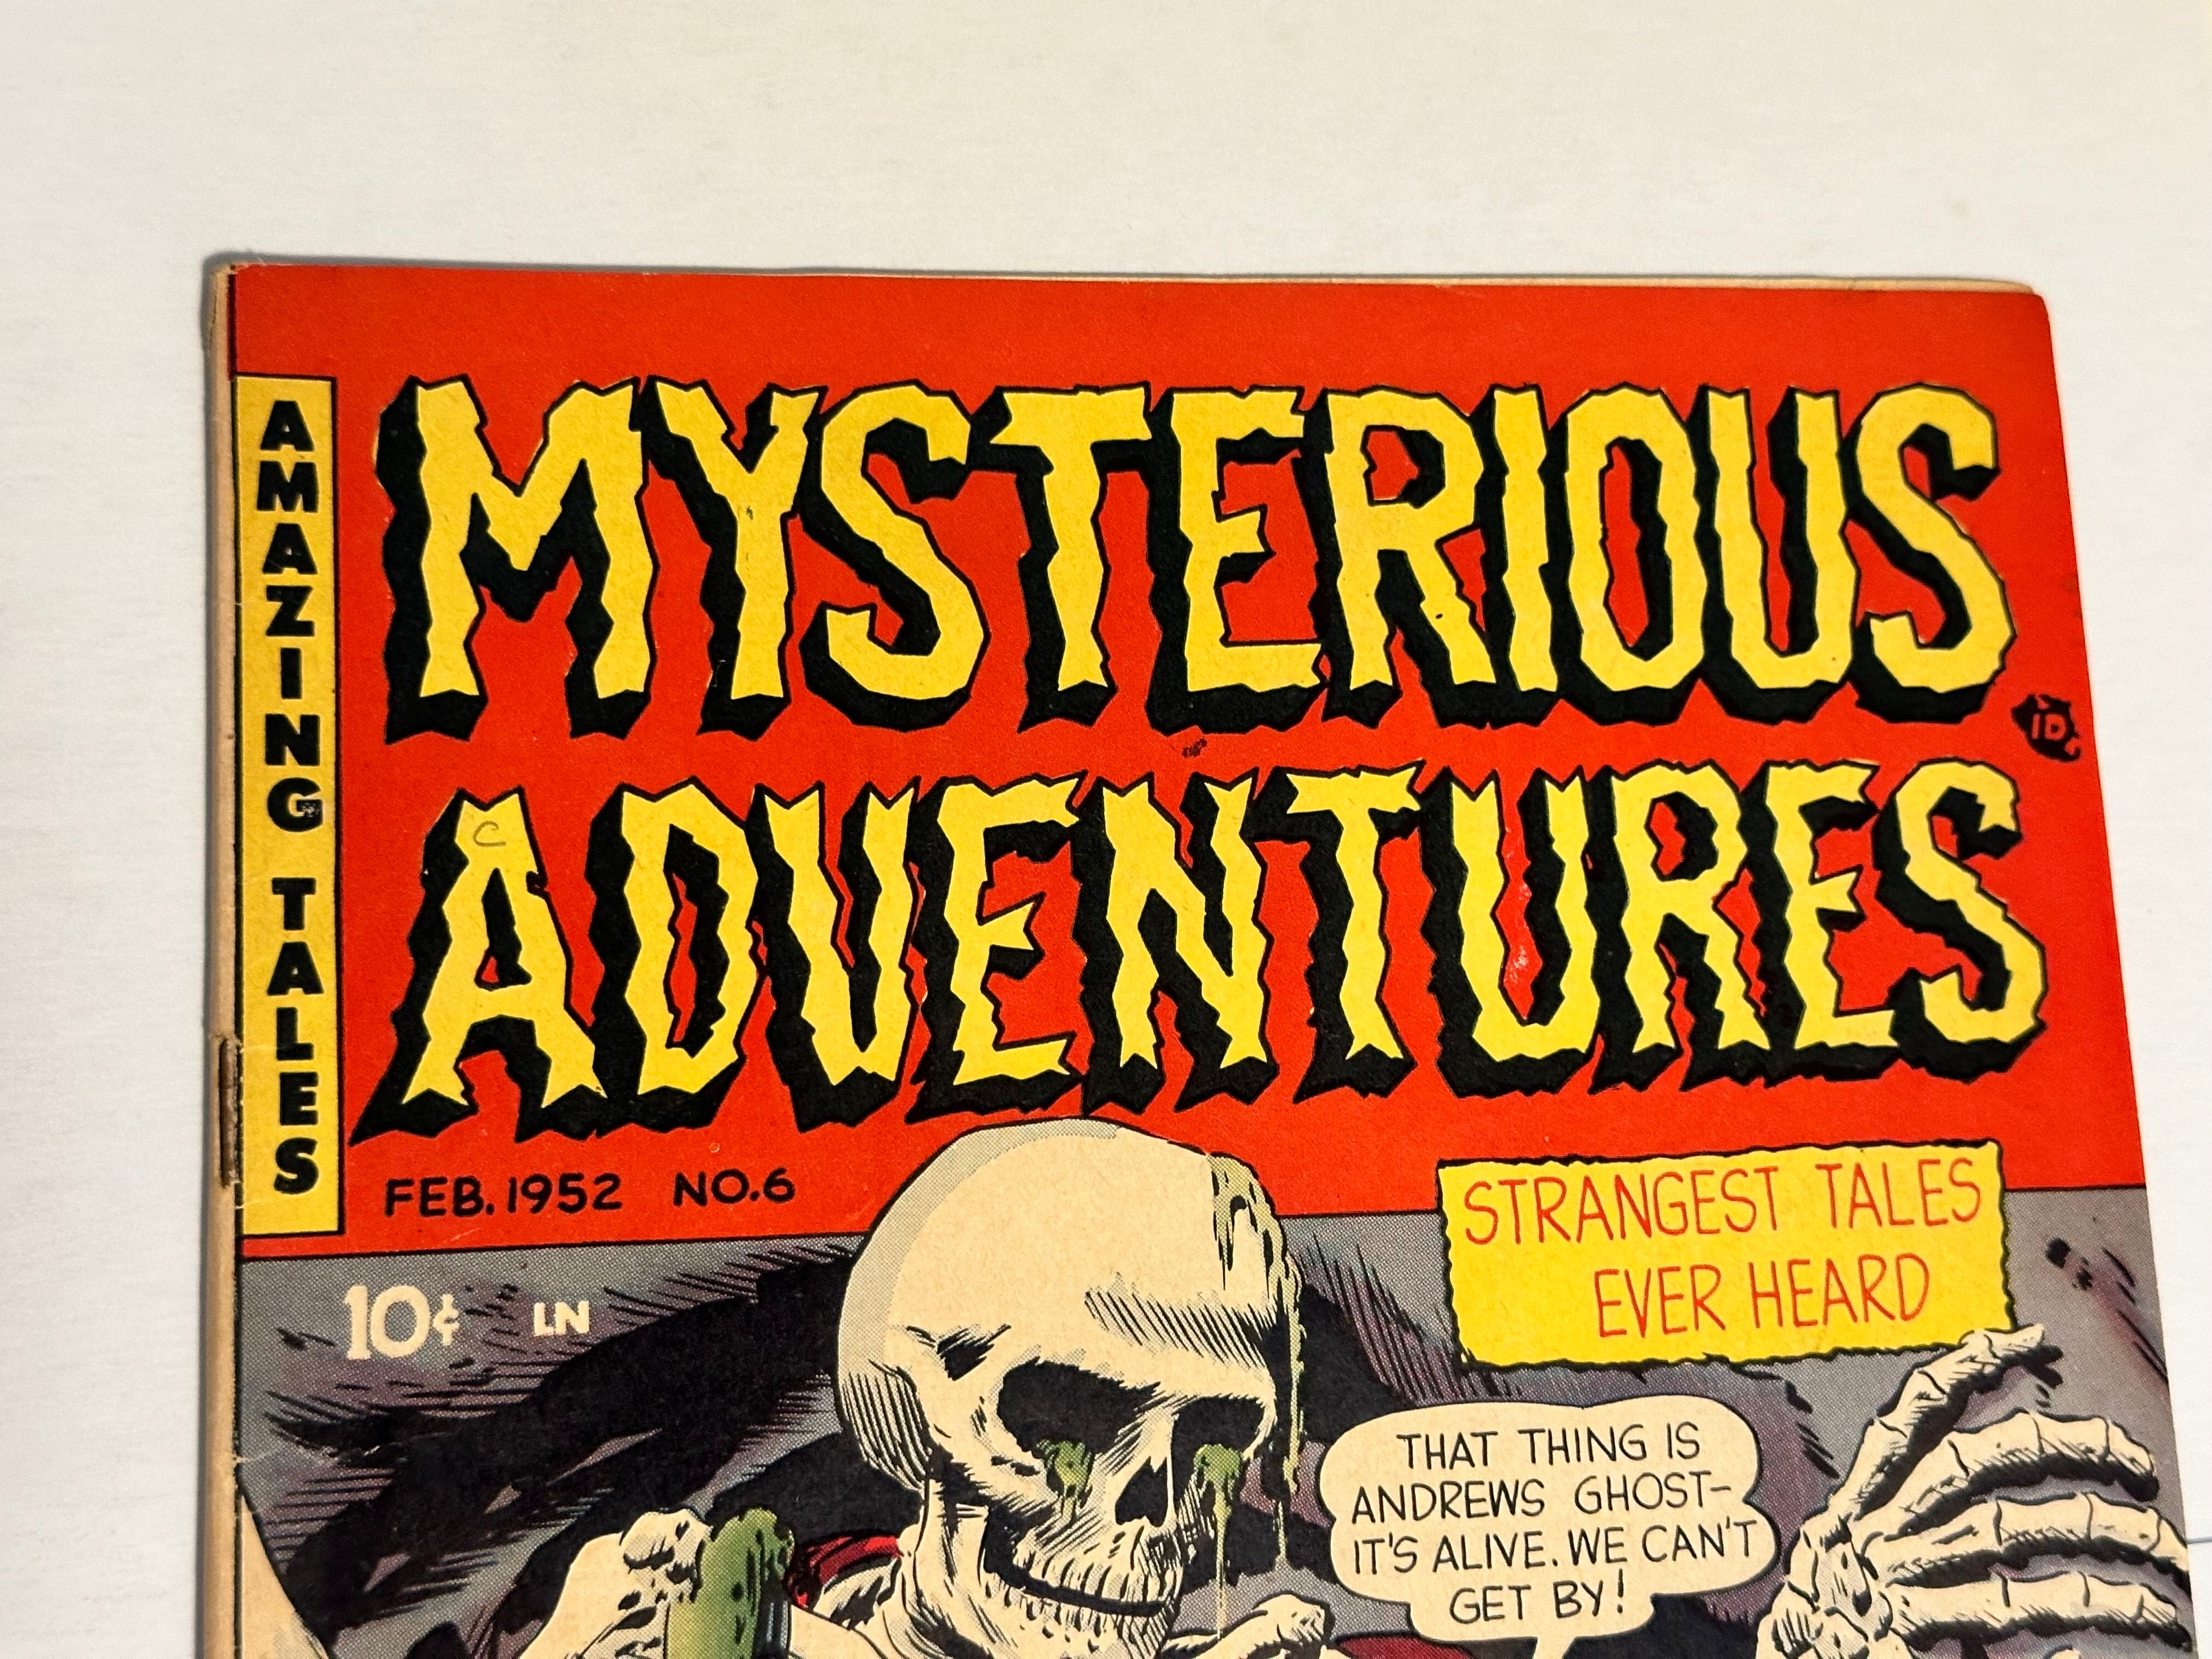 Mysterious adventures Horror comic book #6 from 1952